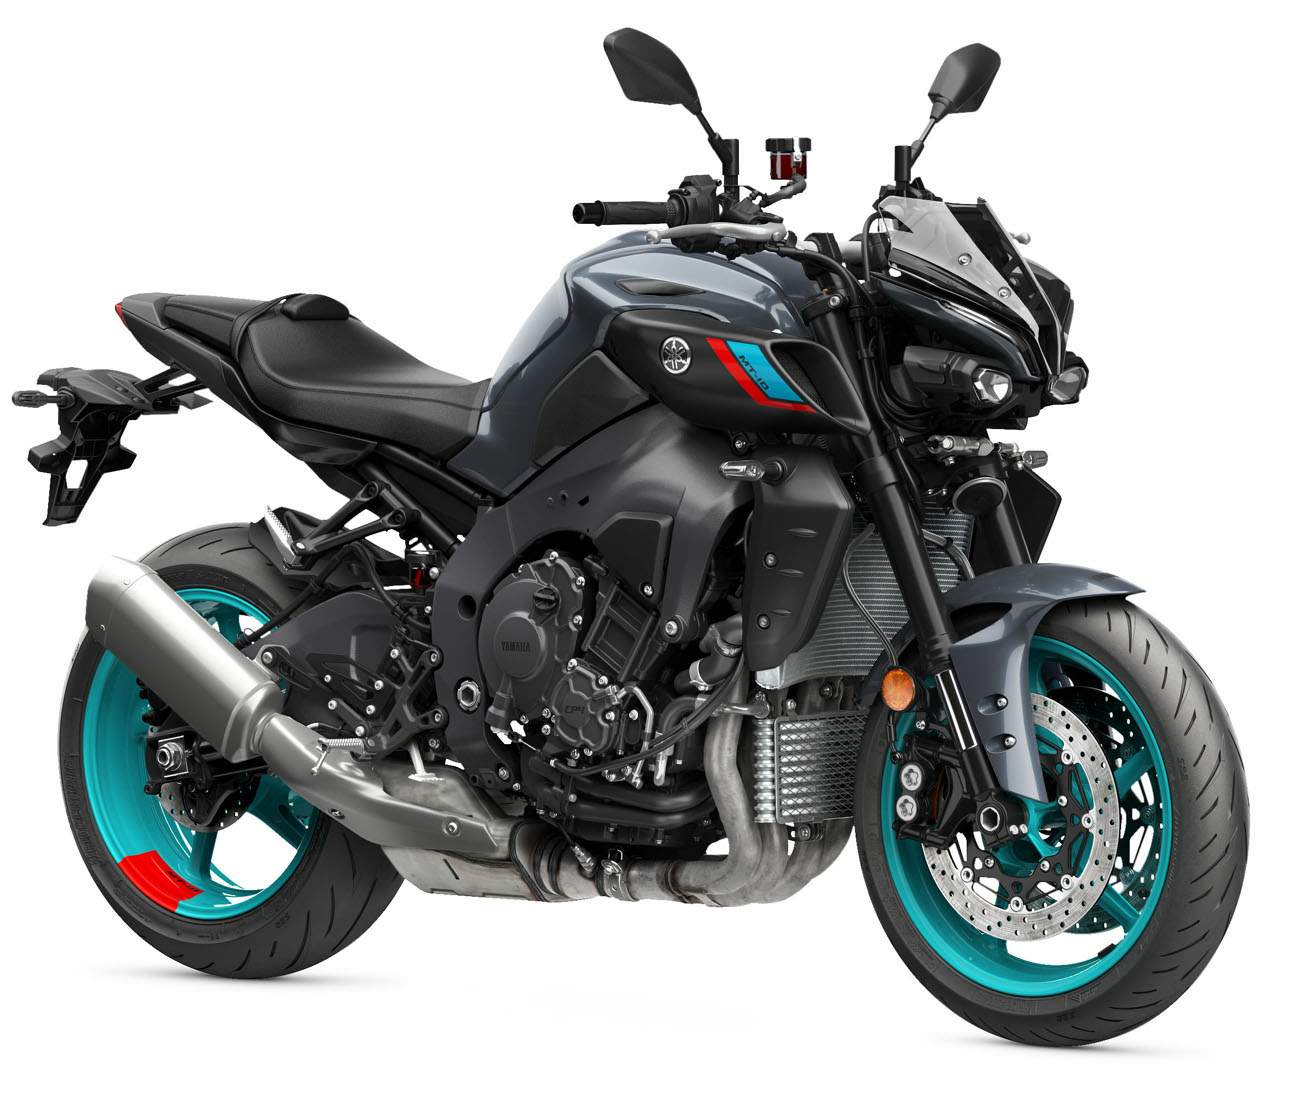 Yamaha MT-10 technical specifications